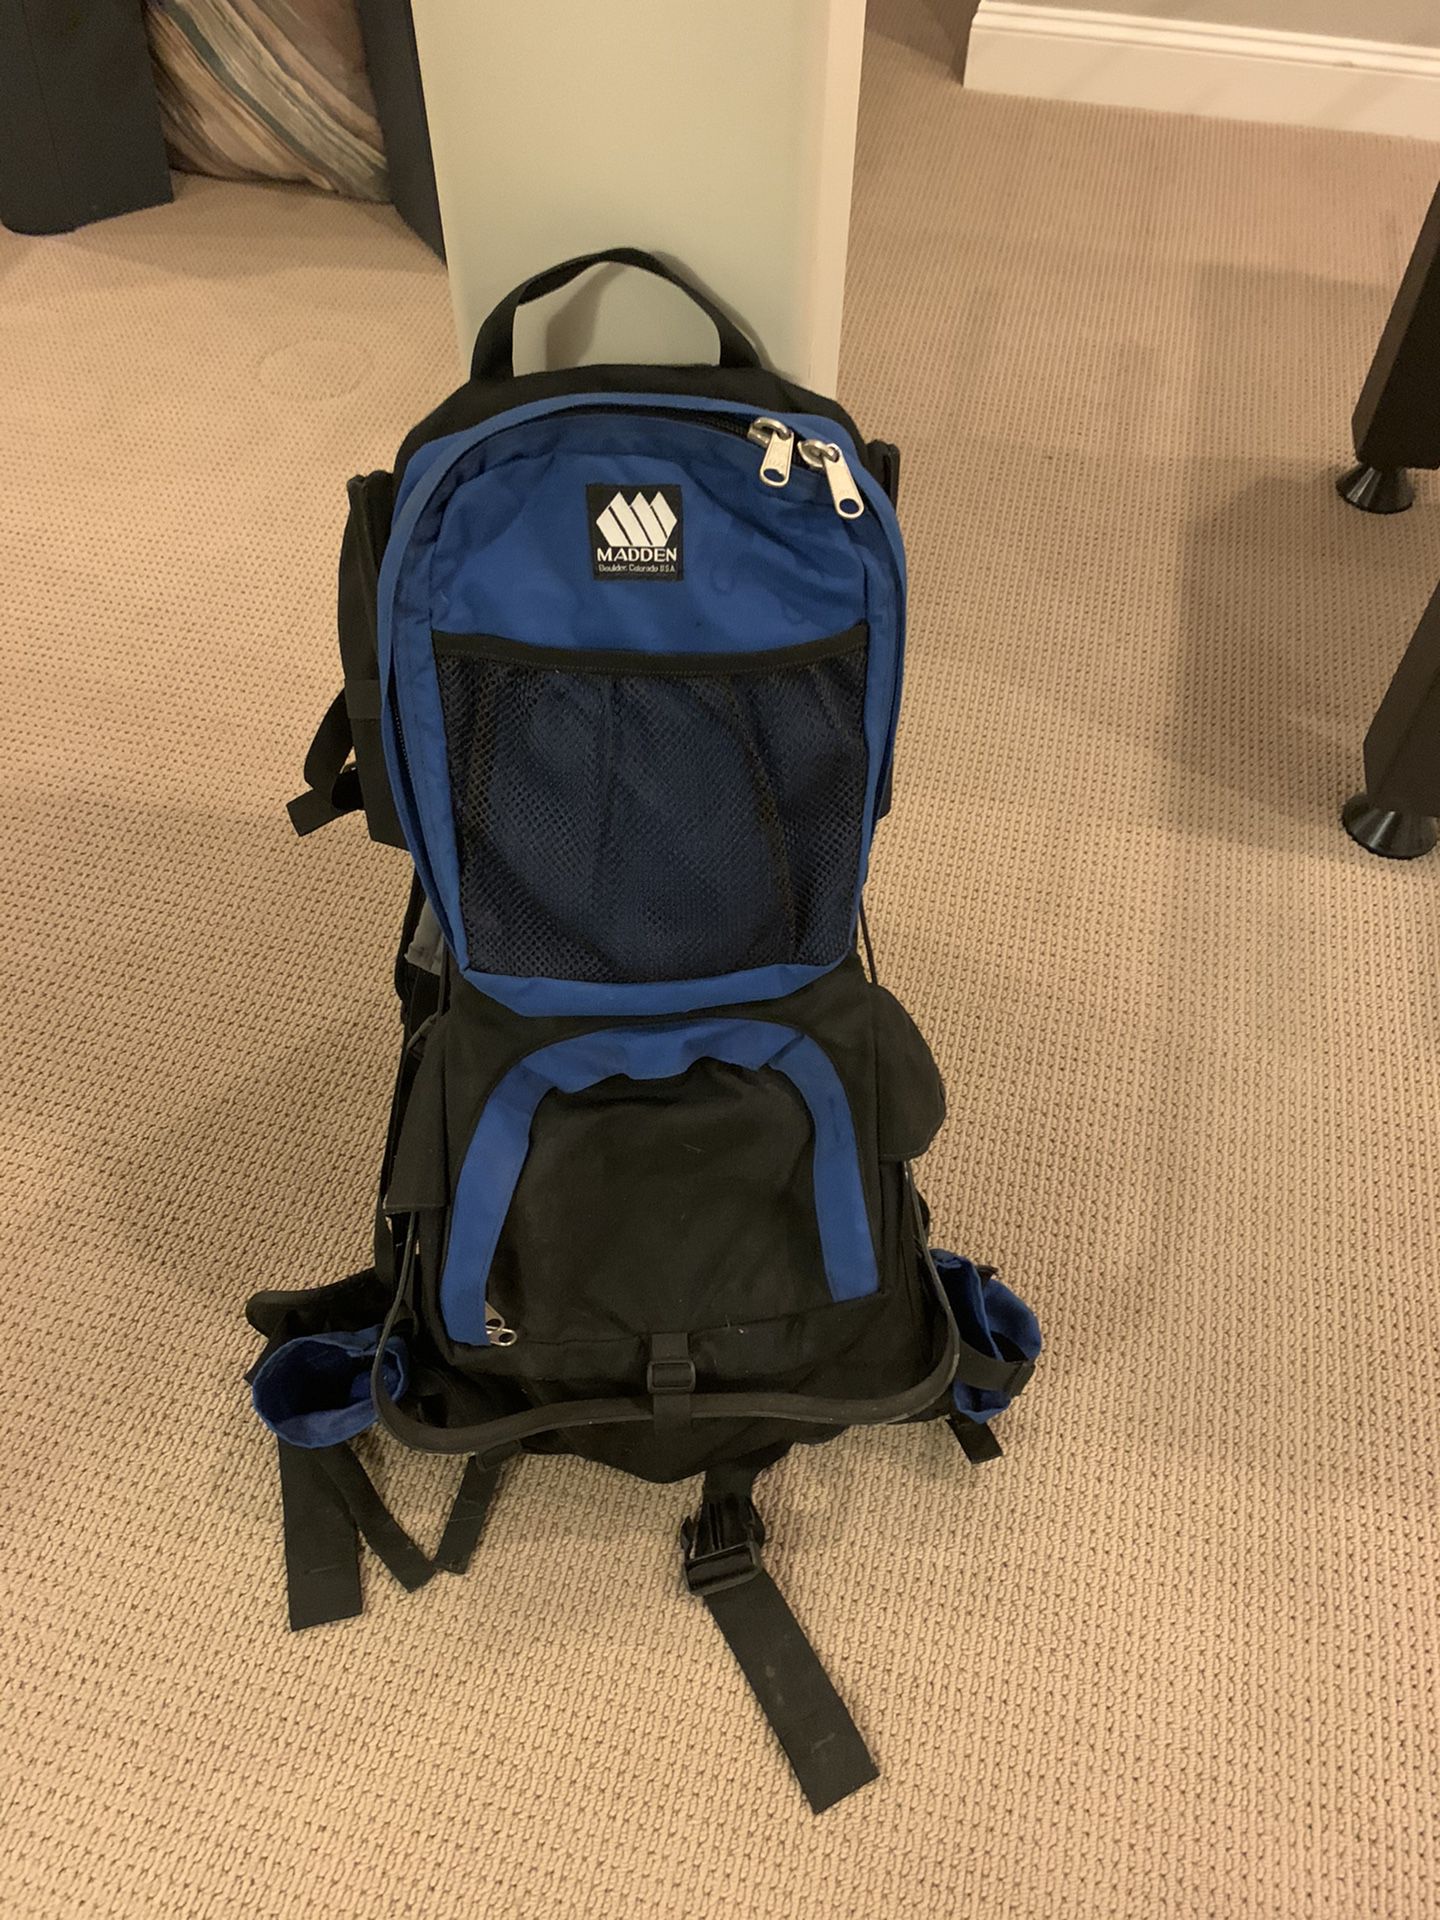 Madden hiking backpack and child carrier